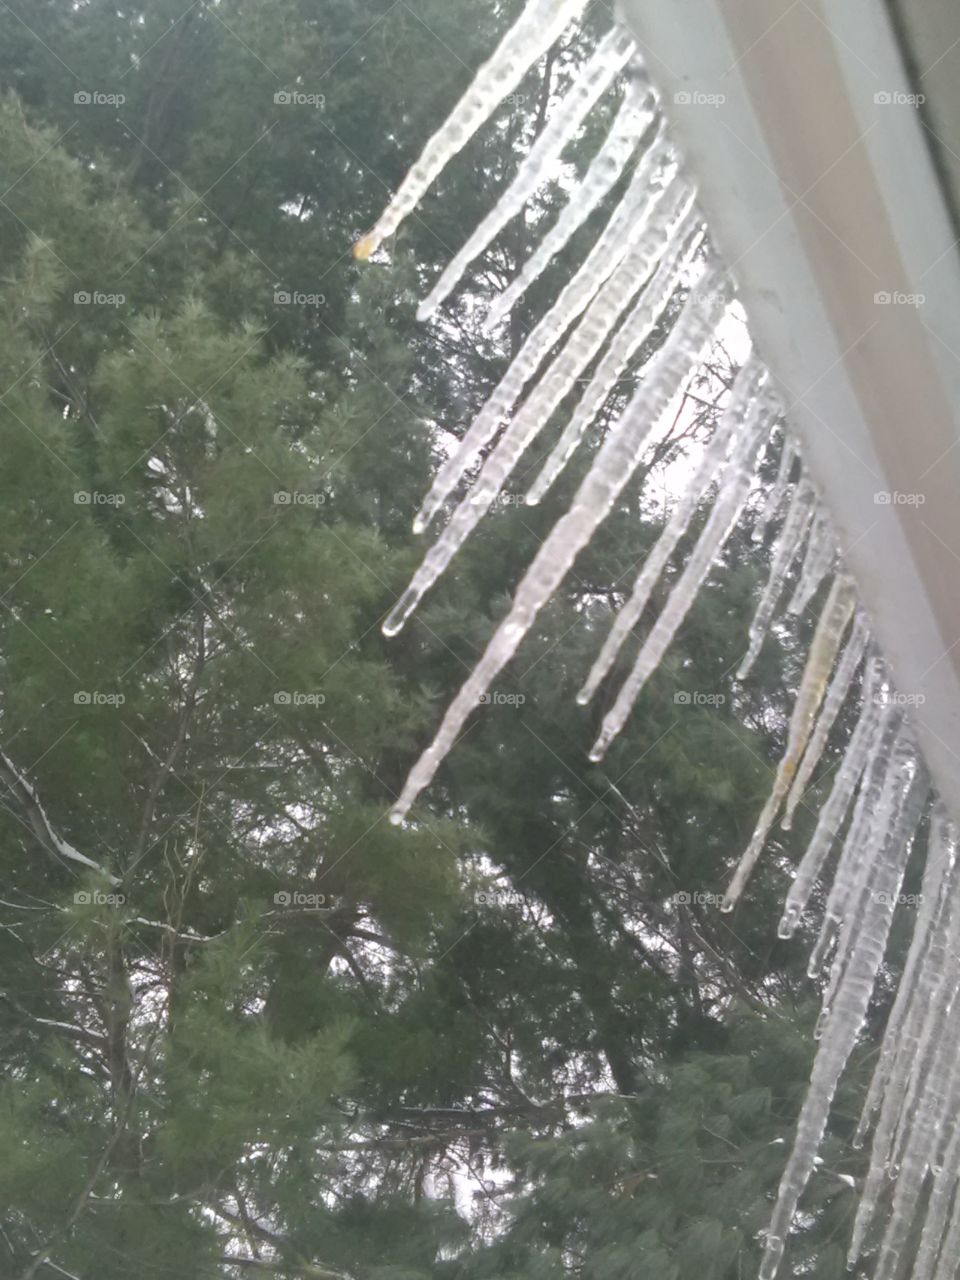 Icicles and Pines